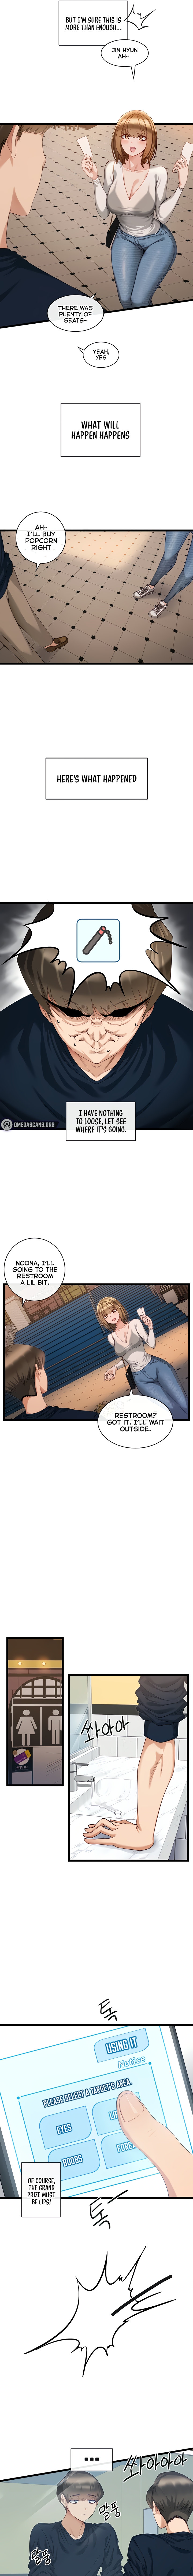 Heroine App - Chapter 3 Page 6